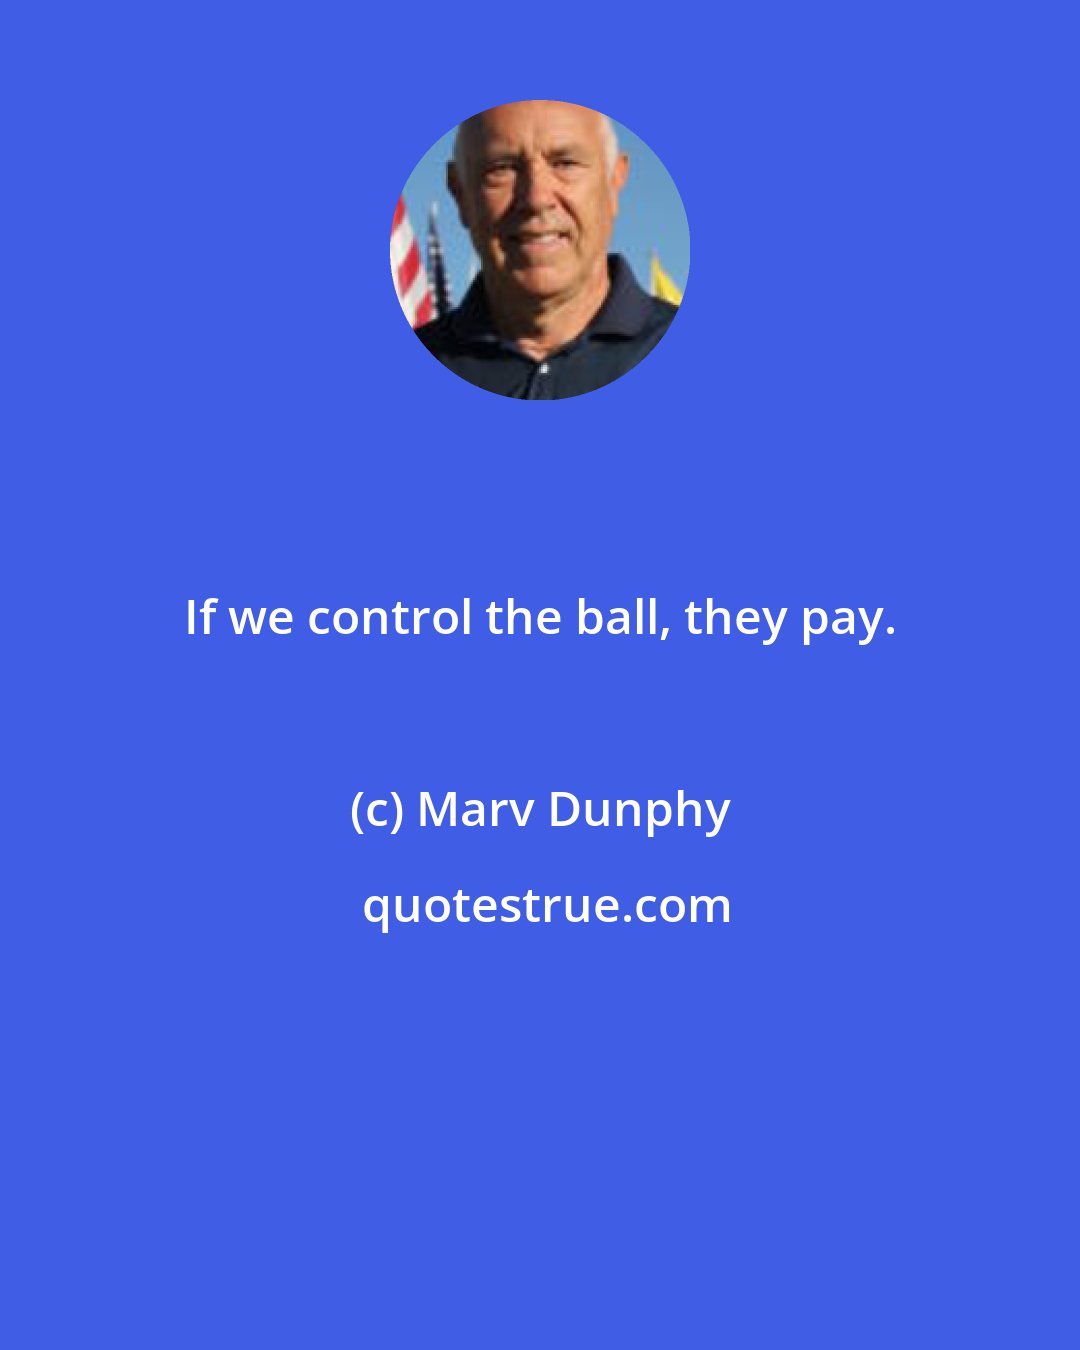 Marv Dunphy: If we control the ball, they pay.